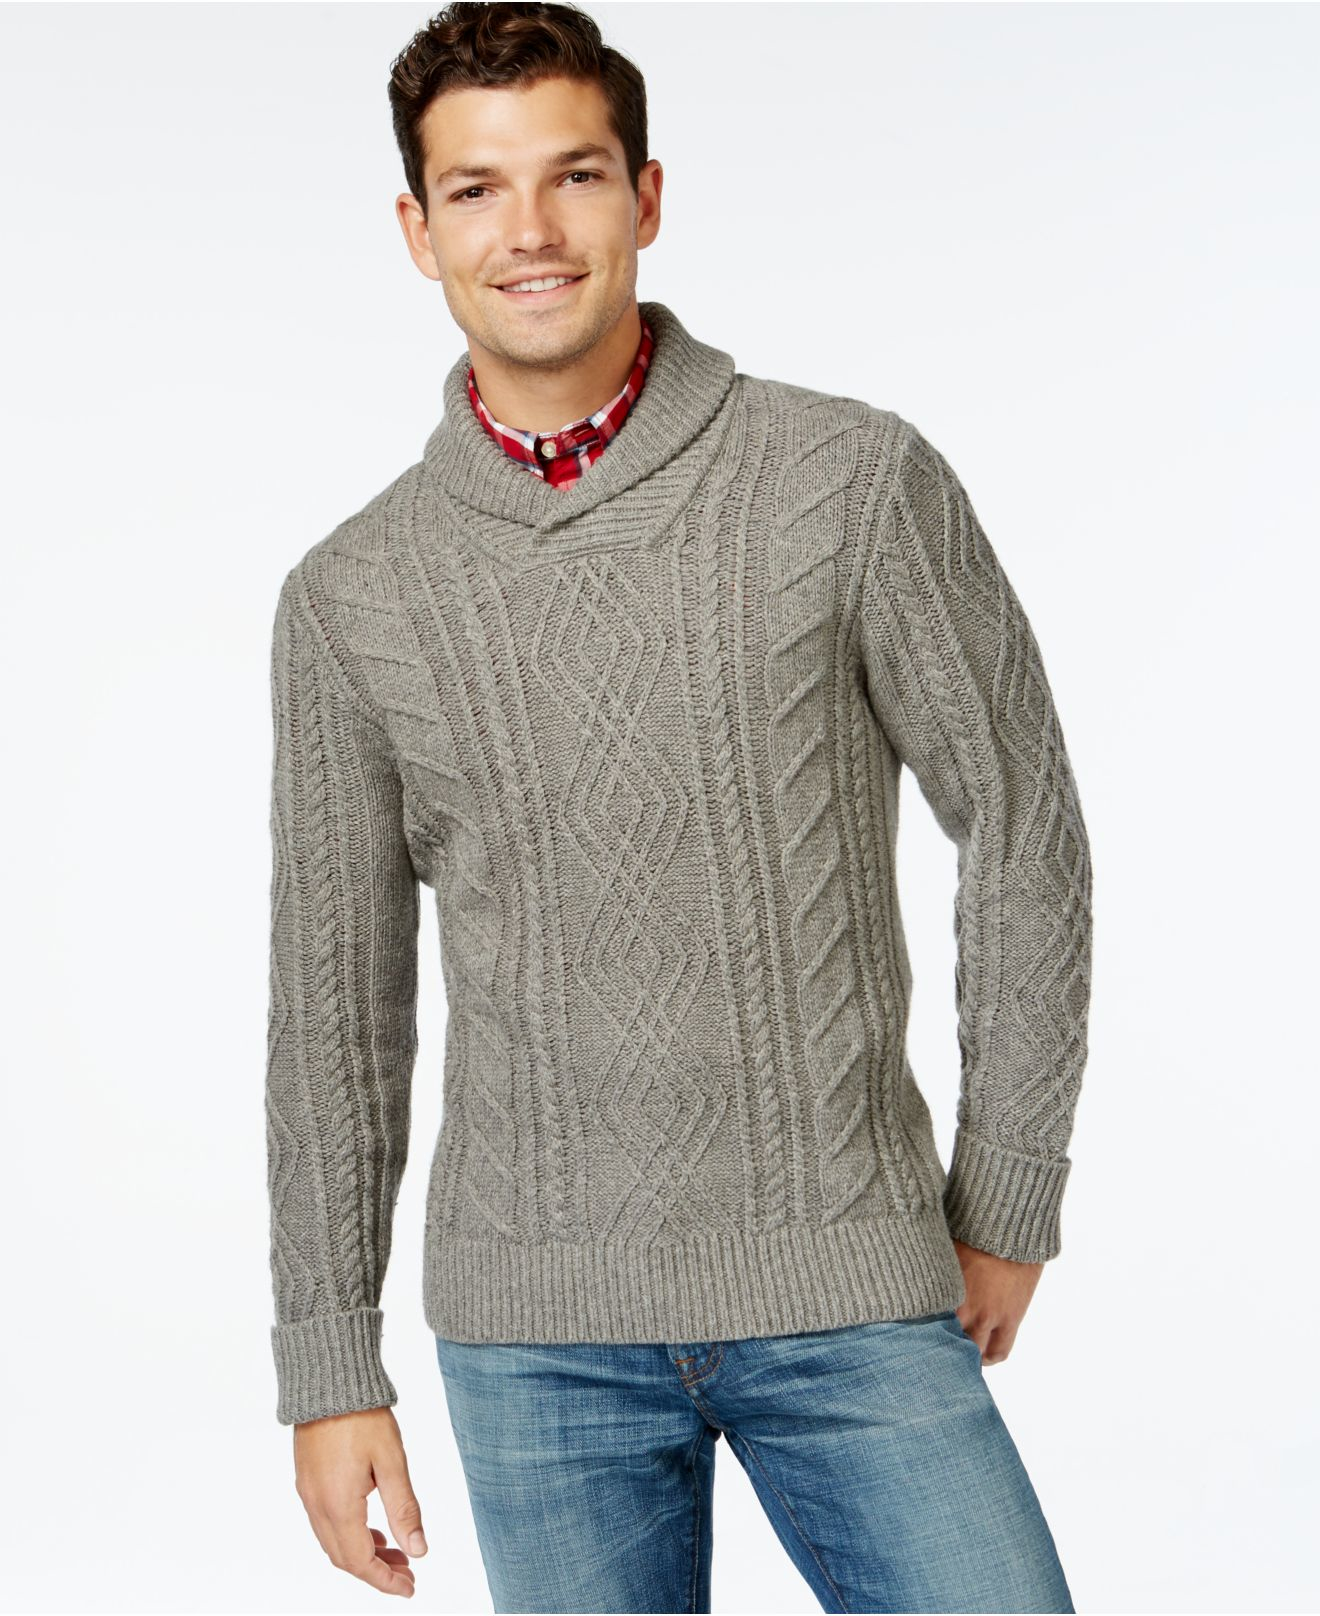 Cardigans With Collars | The Best Price